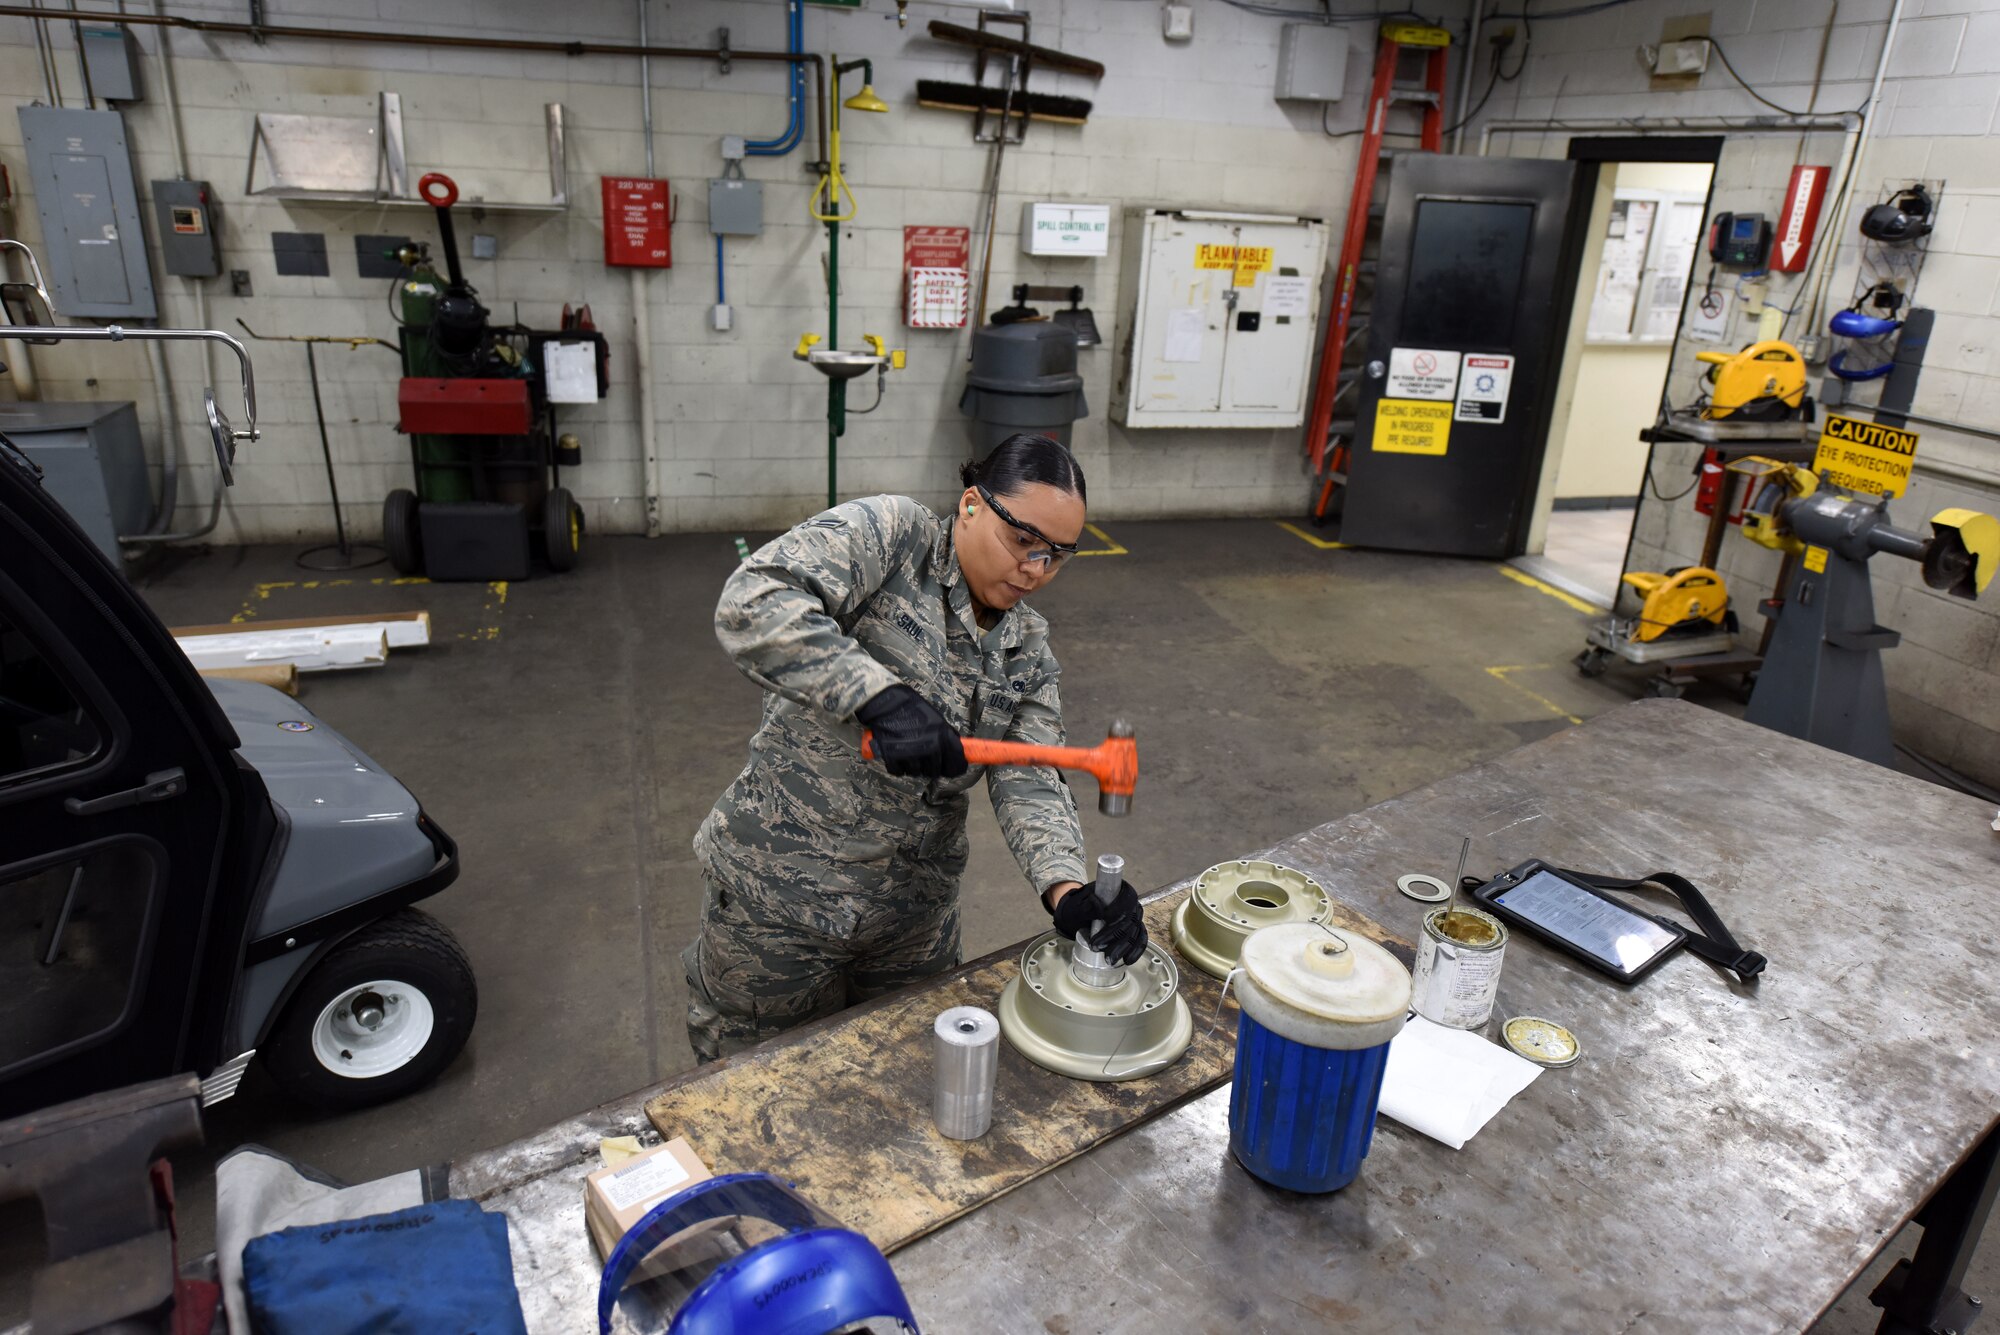 U.S. Air Force Airman 1st Class Sondra Saul, 20th Equipment Maintenance Squadron aircraft metals technician apprentice, hammers a bearing cup inside a wheel bearing in the metal shop at Shaw Air Force Base, S.C., Nov. 30, 2018.